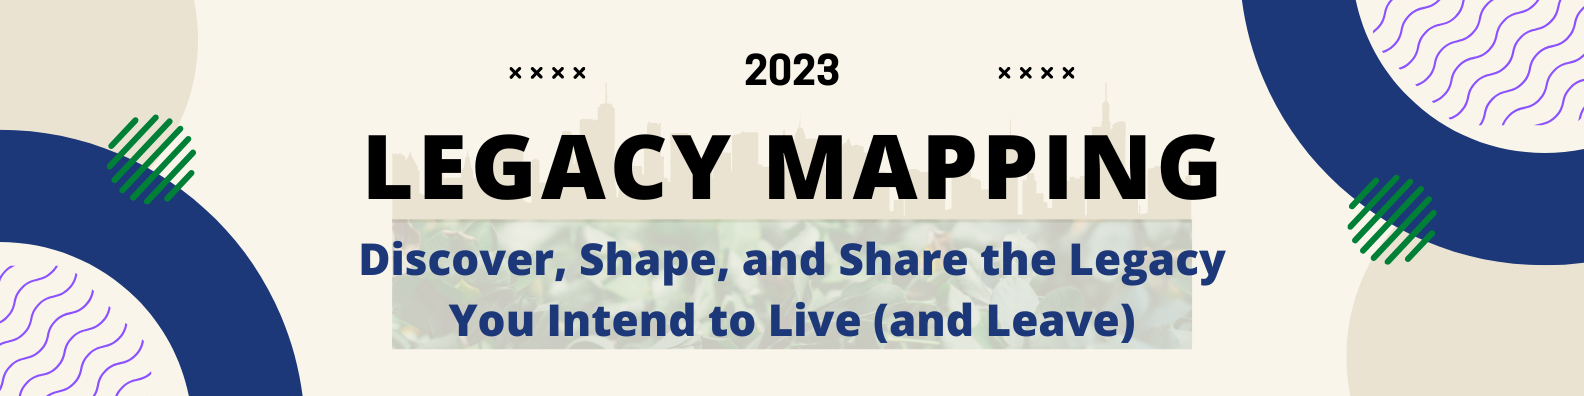 Legacy Mapping Banner
